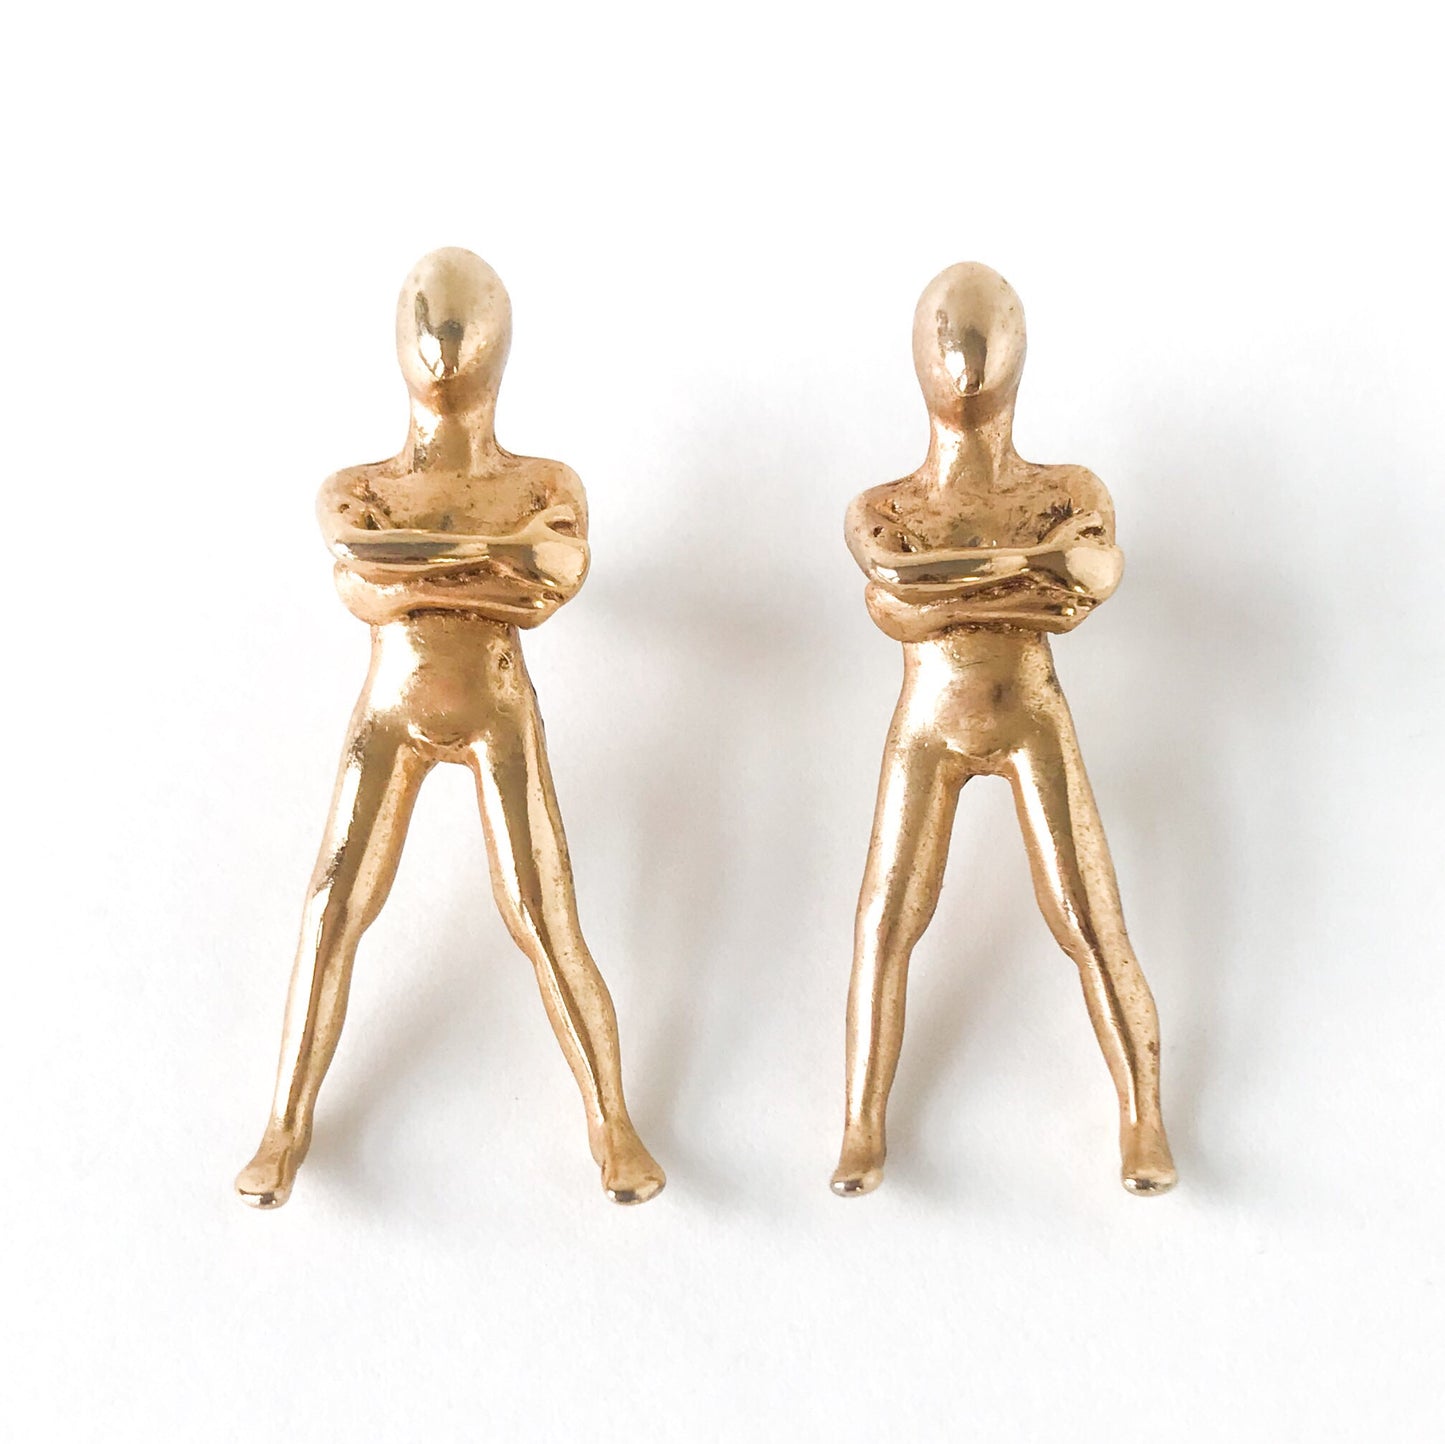 SOLD-Post Modern Large Figural Earrings Gold Plate c. 1980s